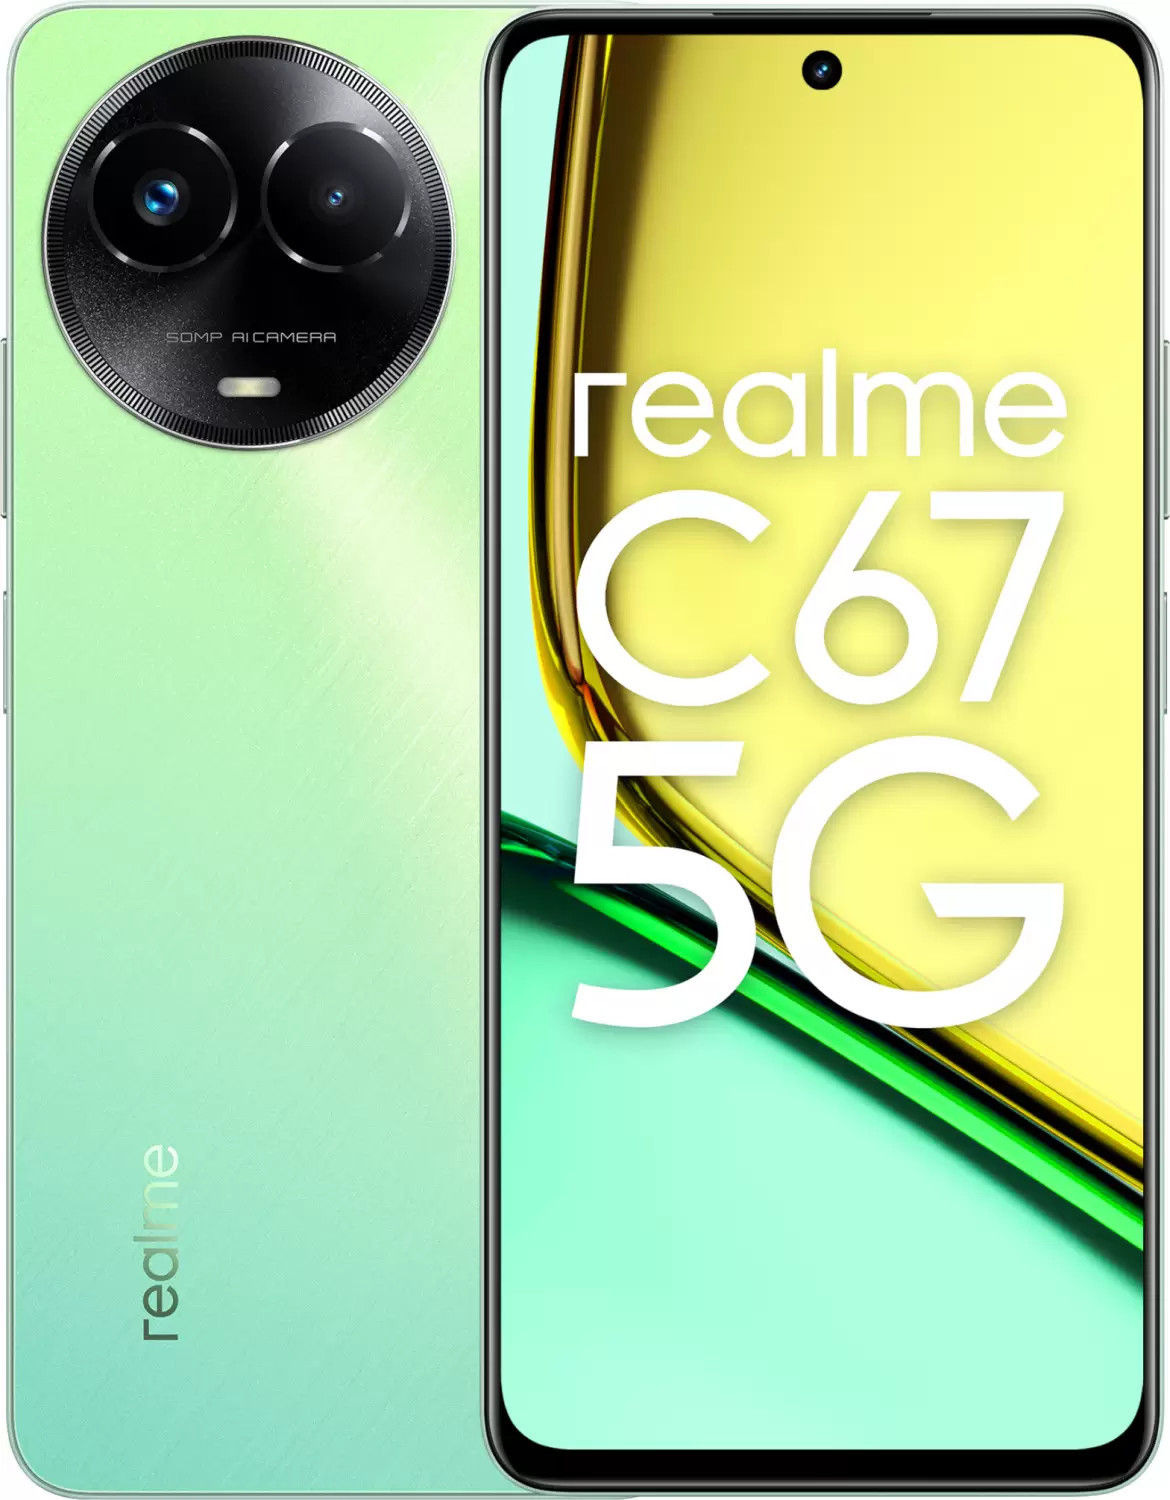 Realme C67 5G India launch date officially announced